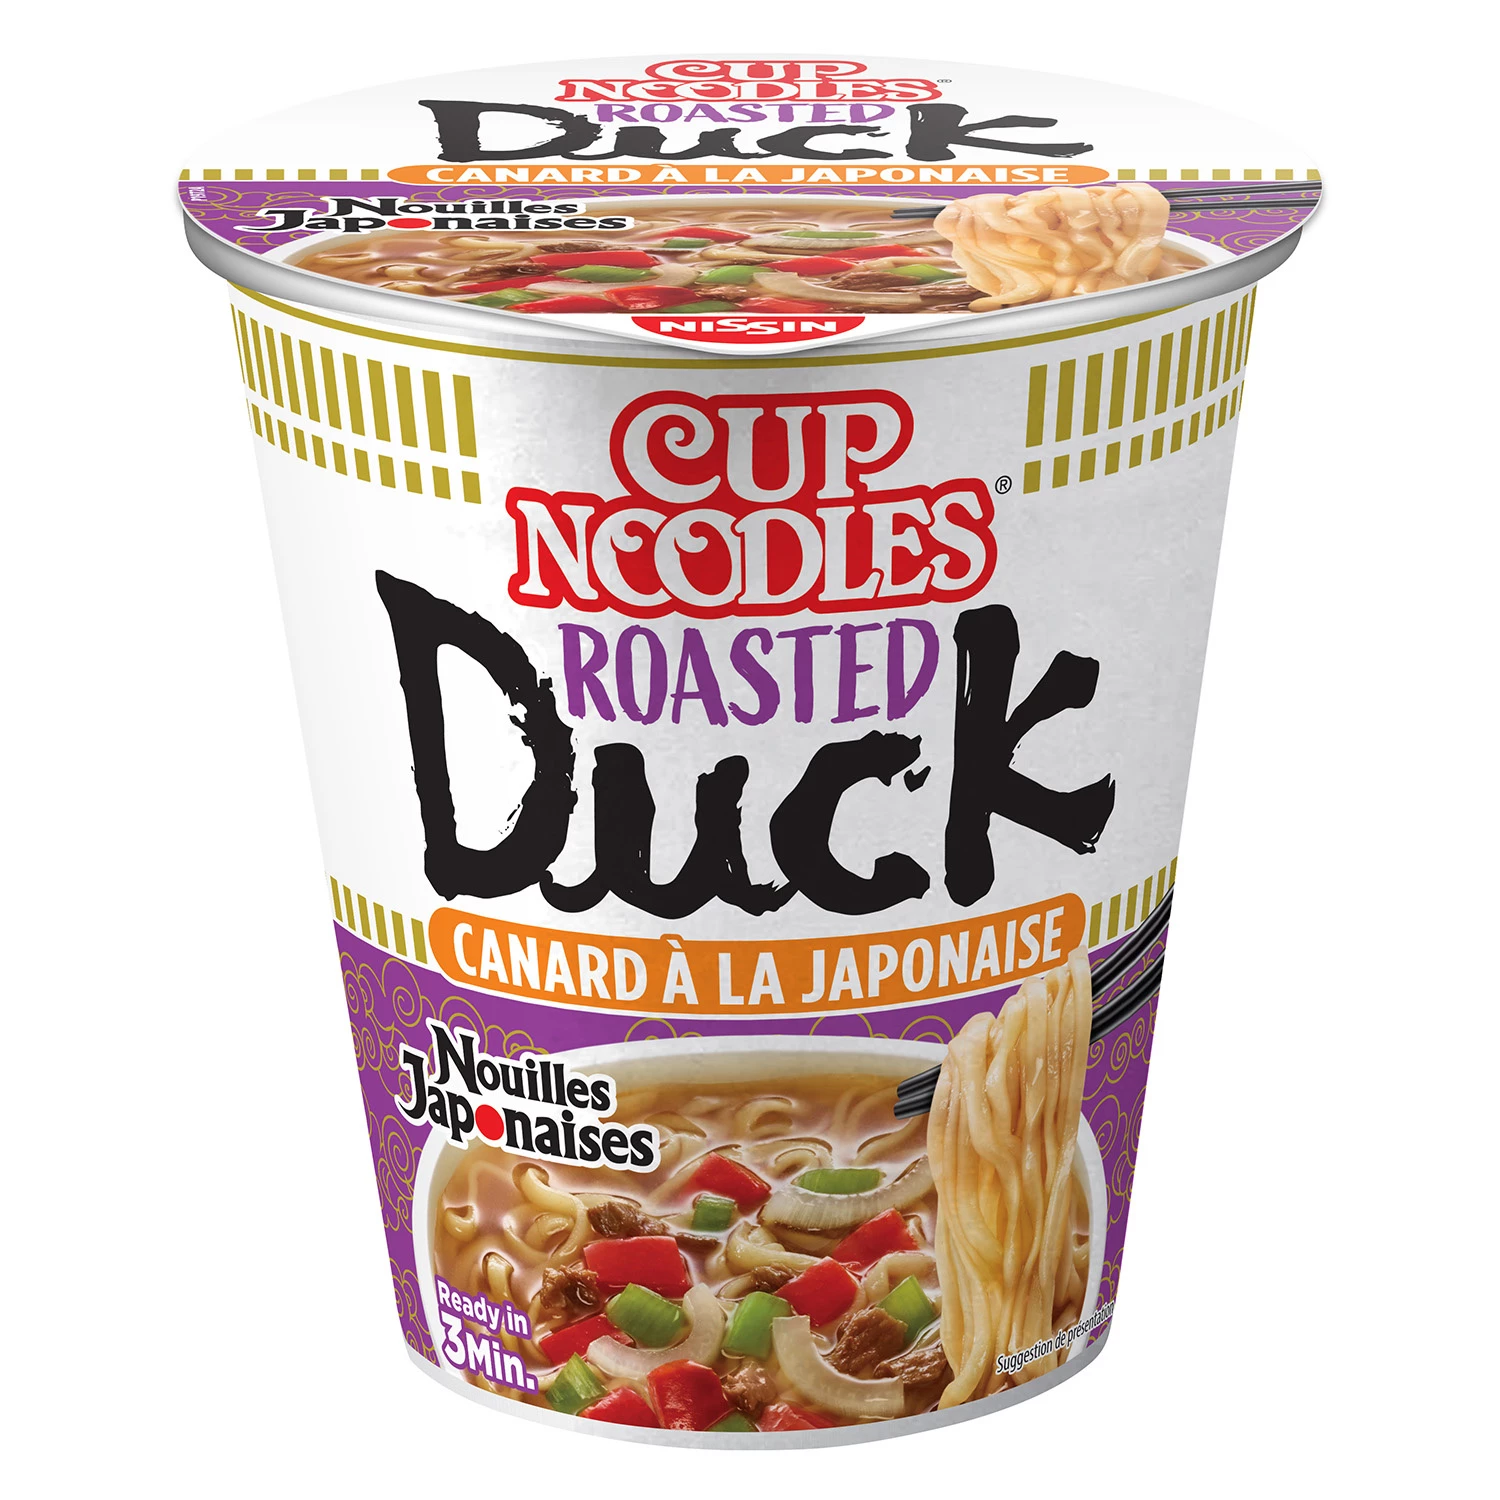 Japanese-style dehydrated duck noodles - NISSIN